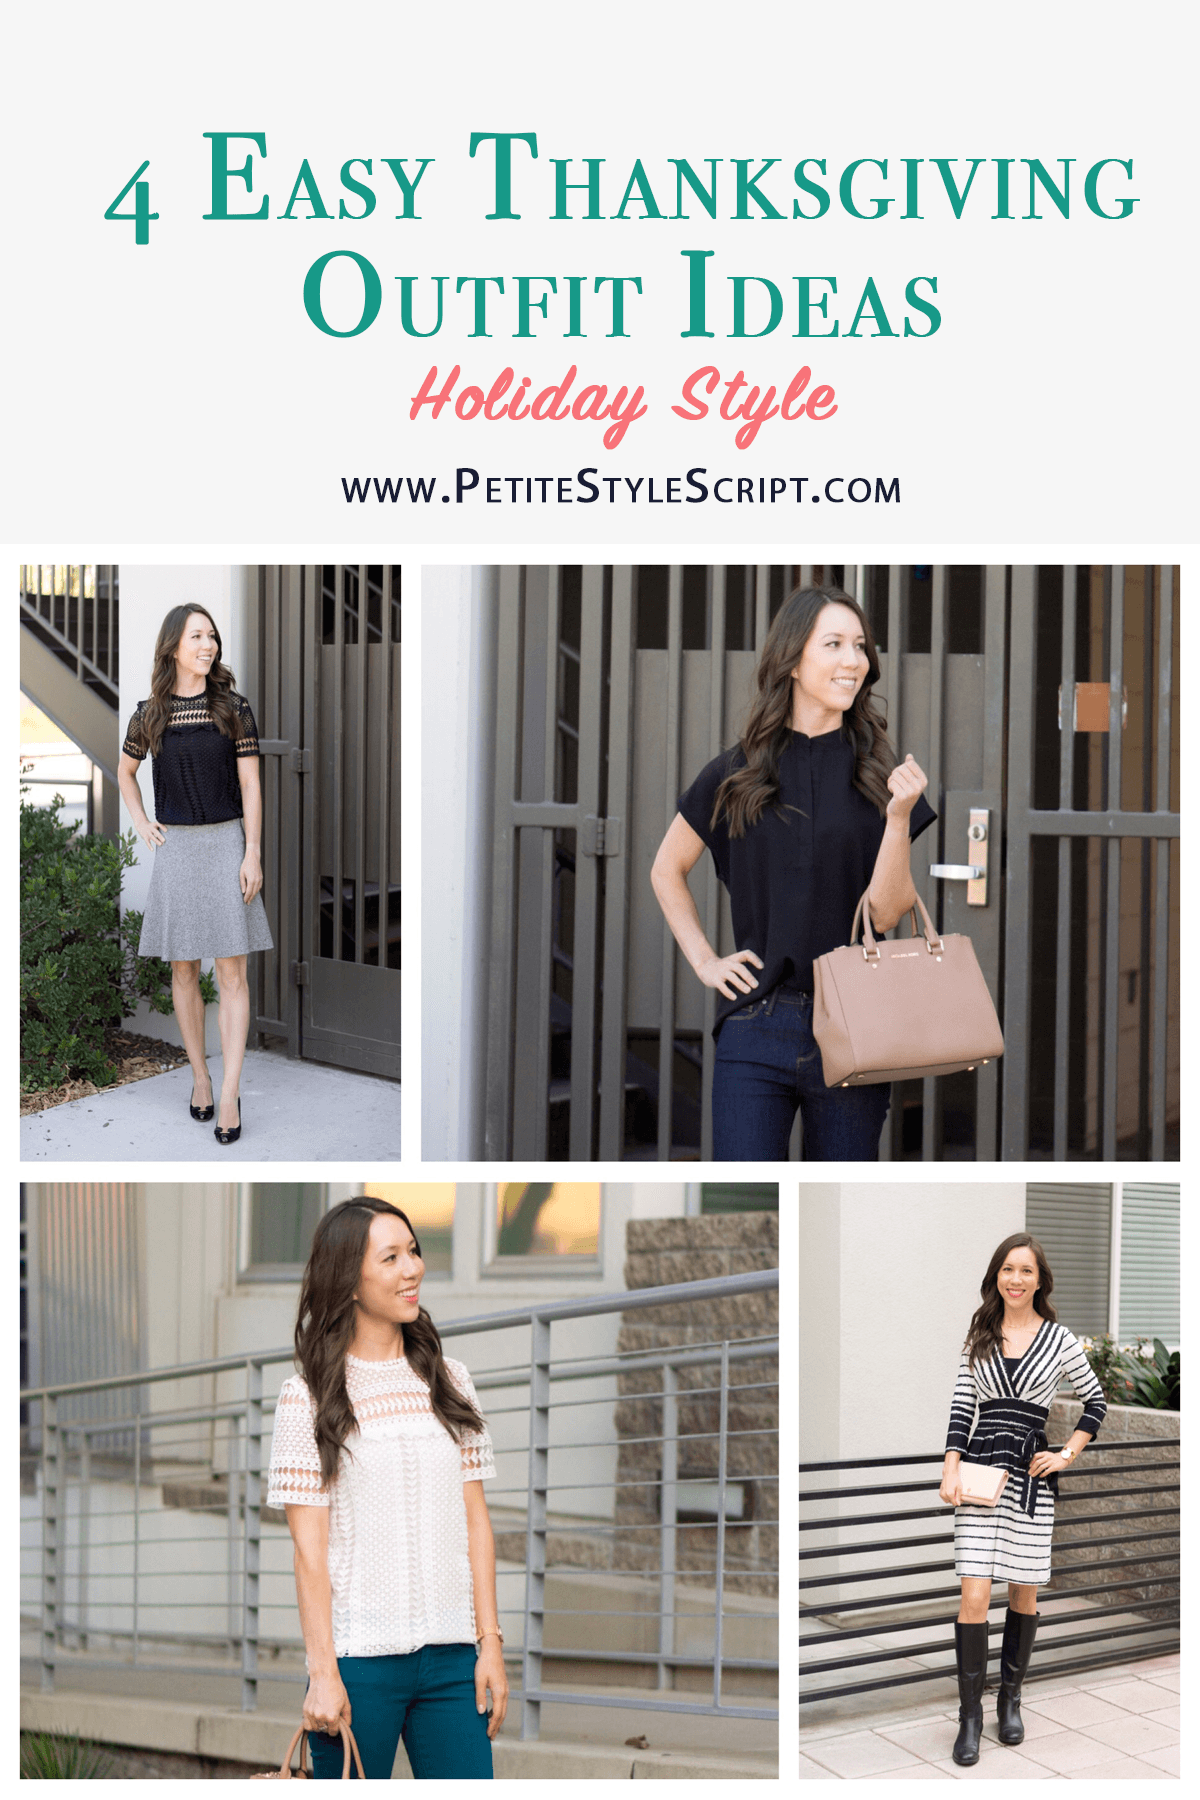 Outfit Inspiration: 4 Easy Thanksgiving Outfit Ideas - Petite Style Script